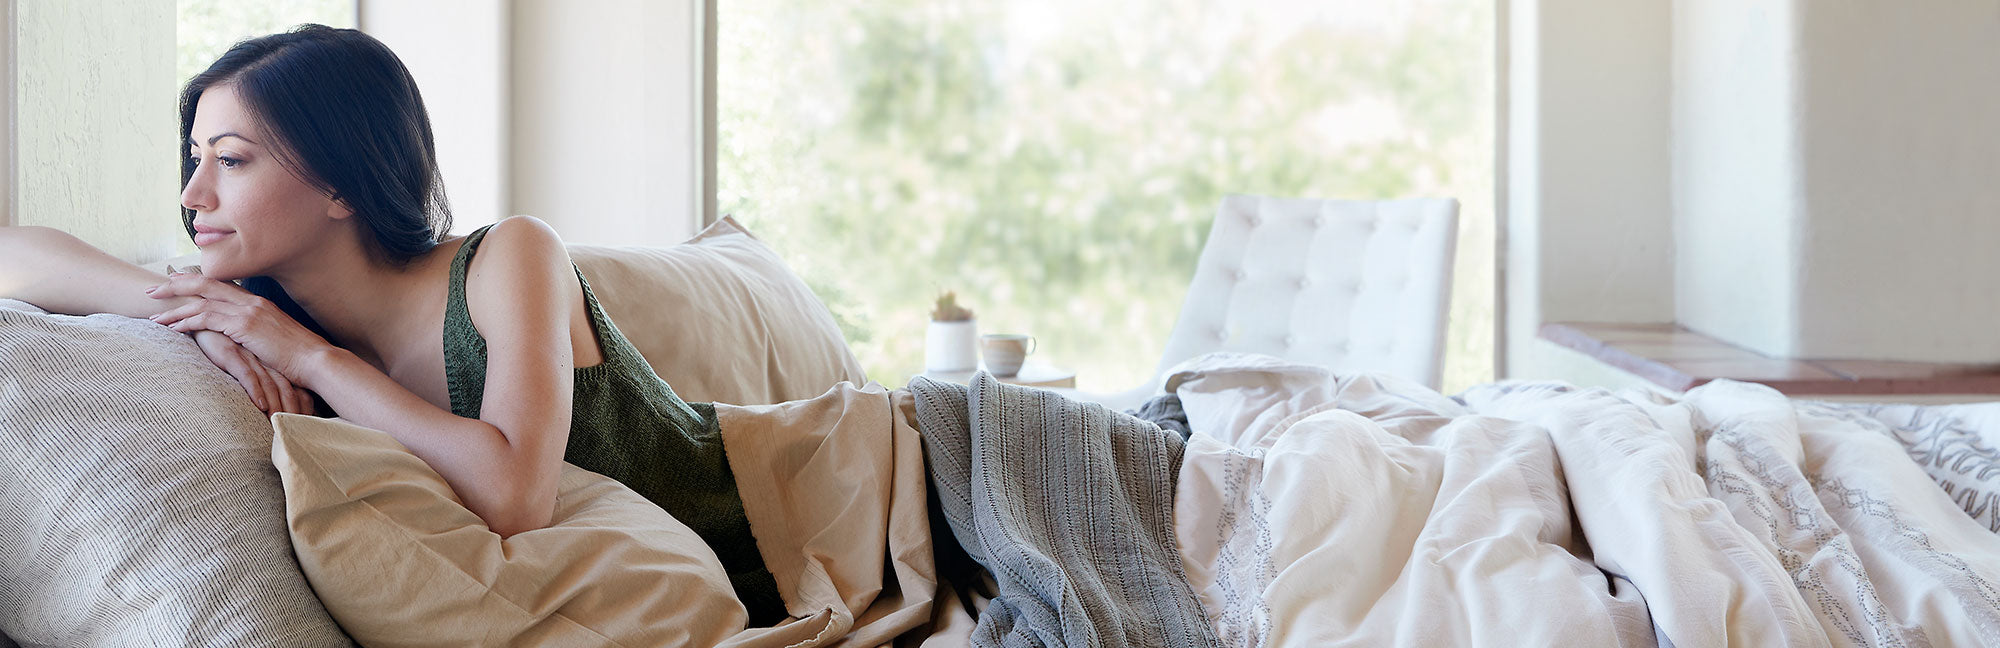 Image of a woman lying in bed, leaning over her pillows to look out the window with the Sonoran Bundle on her bed